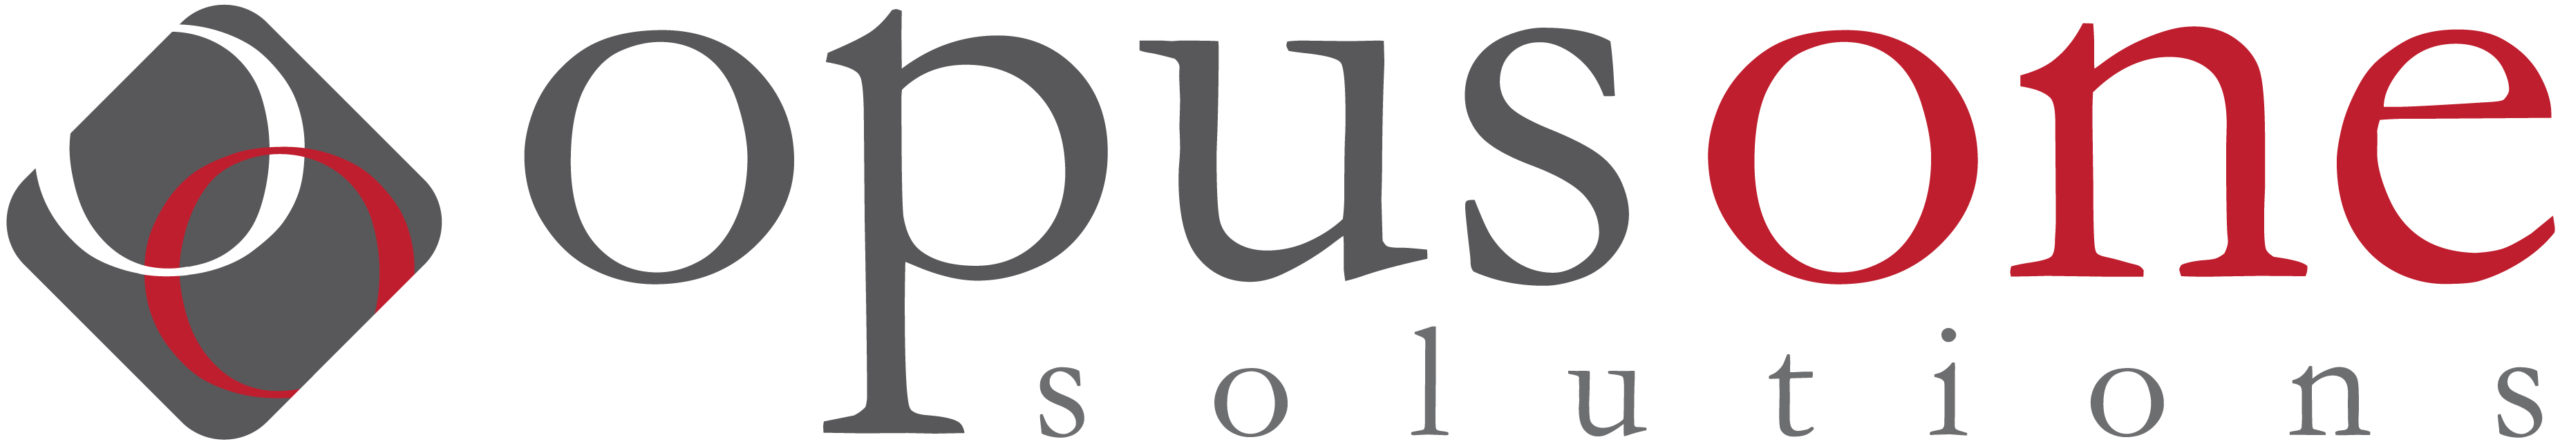 Opus One Solutions